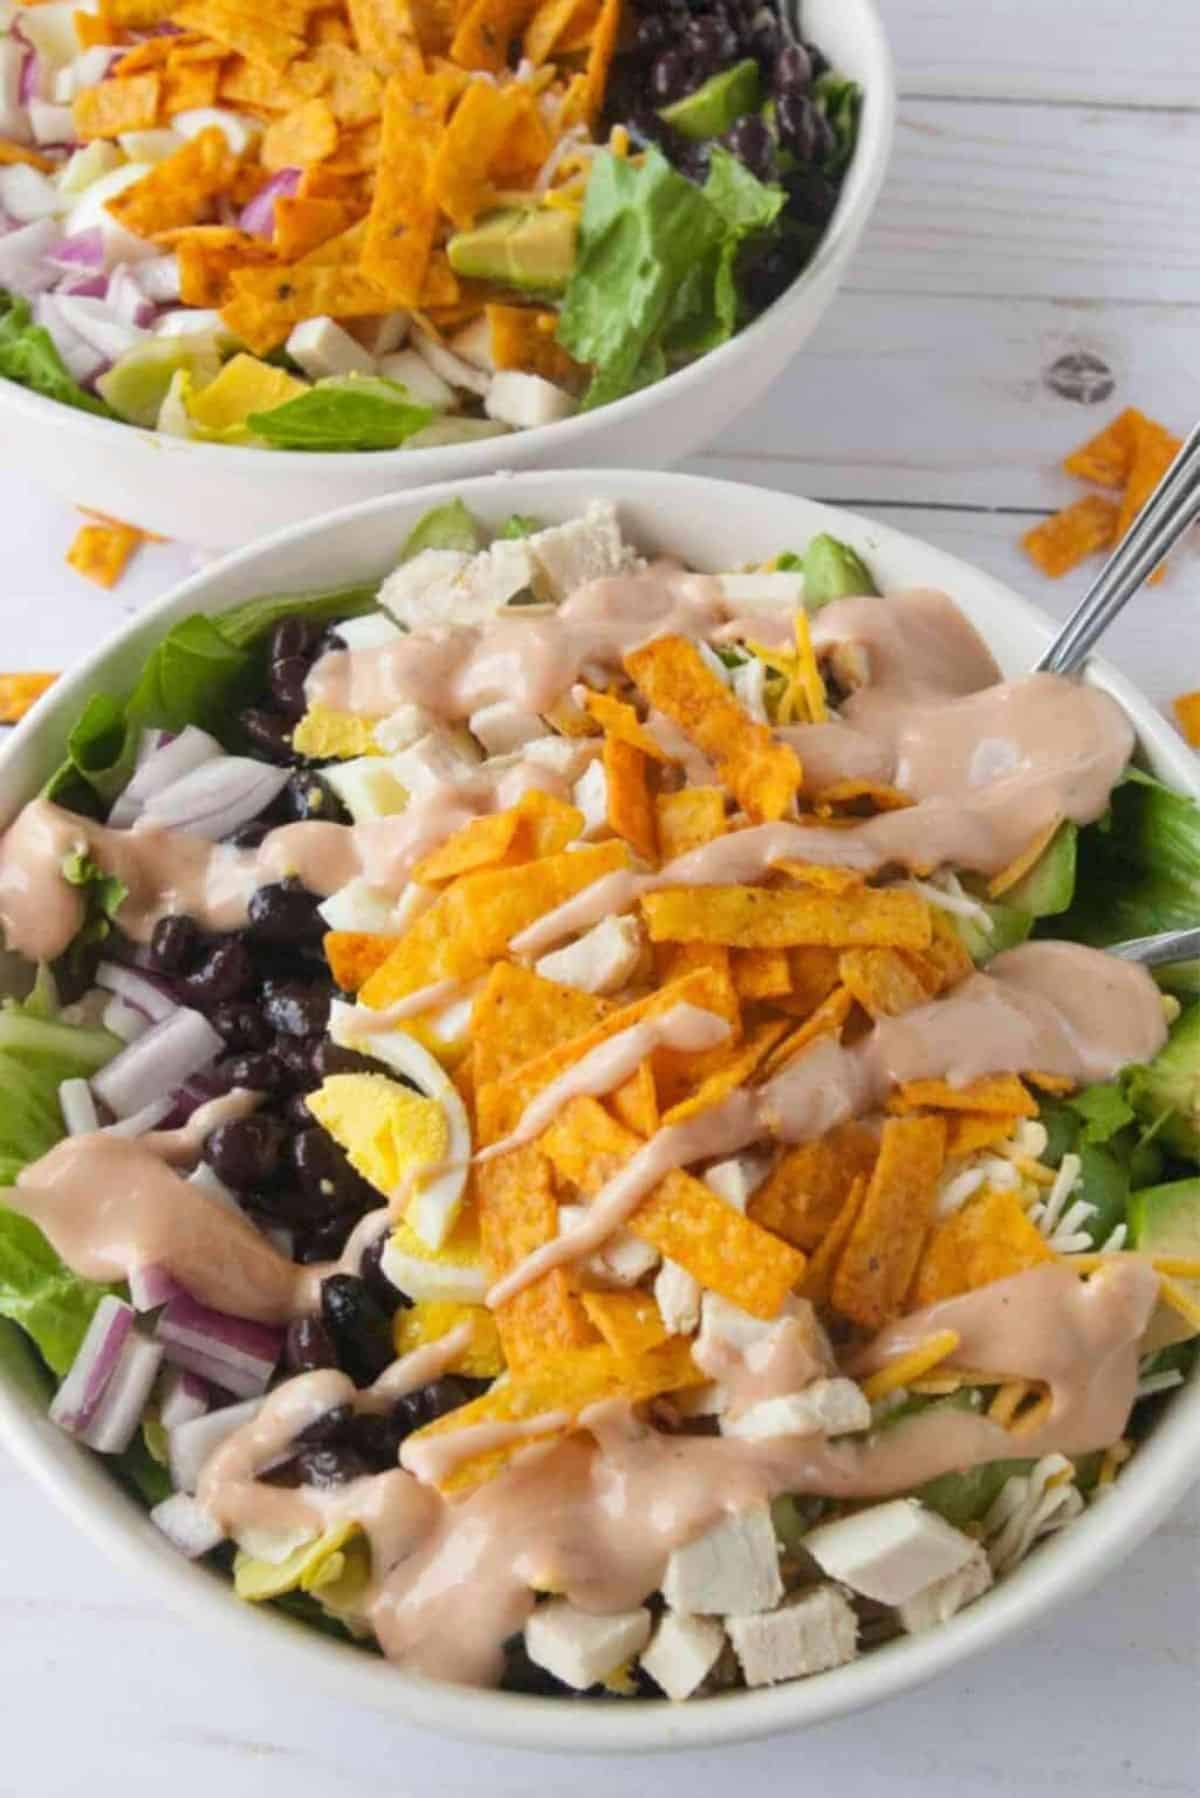 Delicious Southern BBQ Chicken Salad with Barbeque Ranch Dressing in a white bowl.